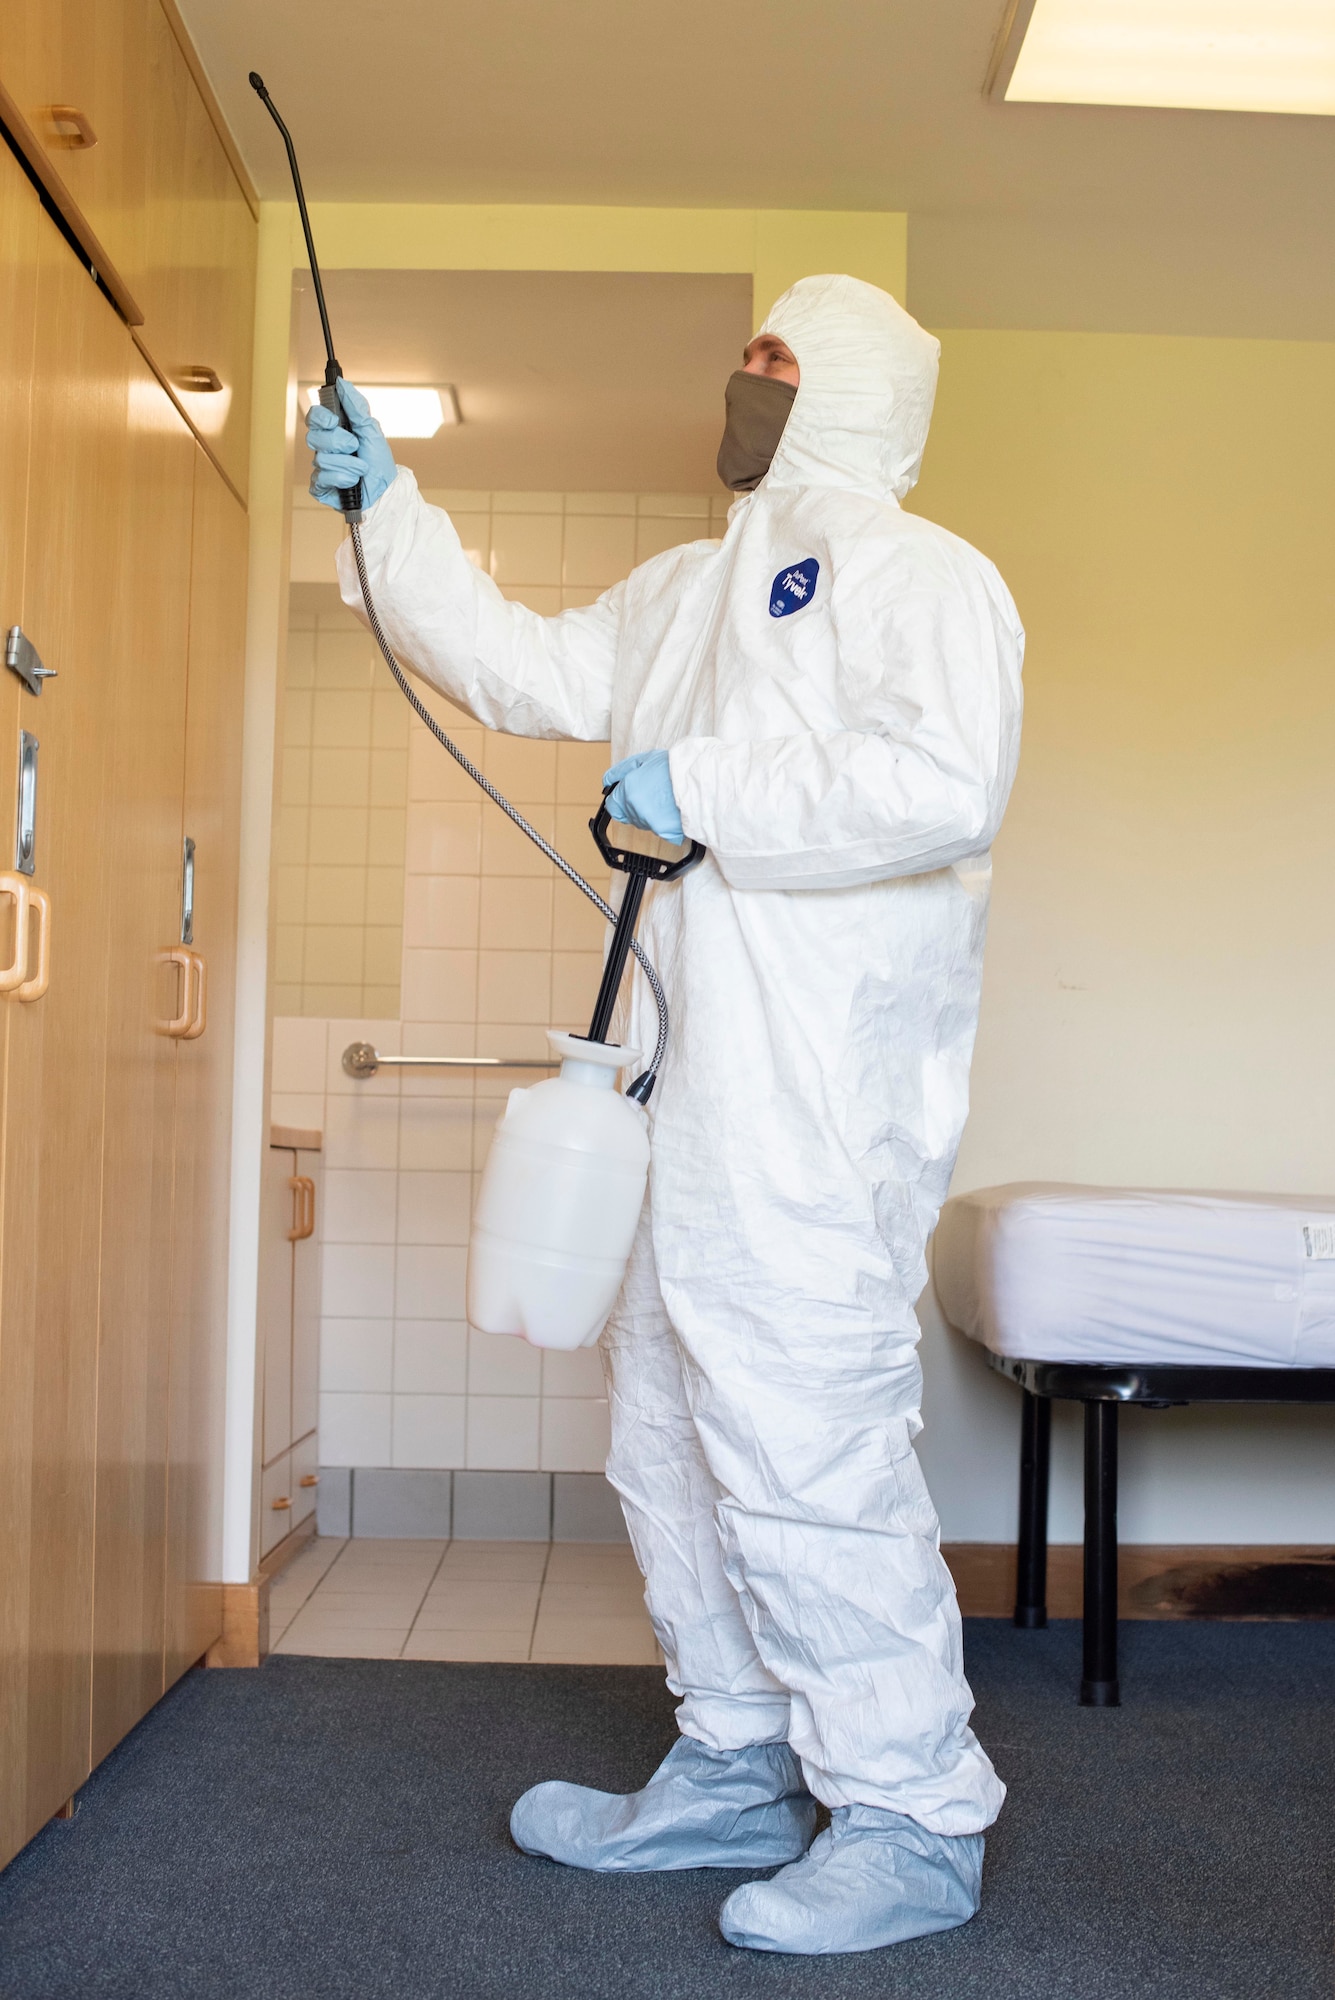 A Team Mildenhall Airman simulates spraying a bleach solution as part of his cleaning-team training at RAF Mildenhall, England, April 15, 2020. The base cleaning team is a precautionary force established to fight the spread of COVID-19 and protect the health and wellness of Airmen. (U.S. Air Force photo by Airman 1st Class Joseph Barron)